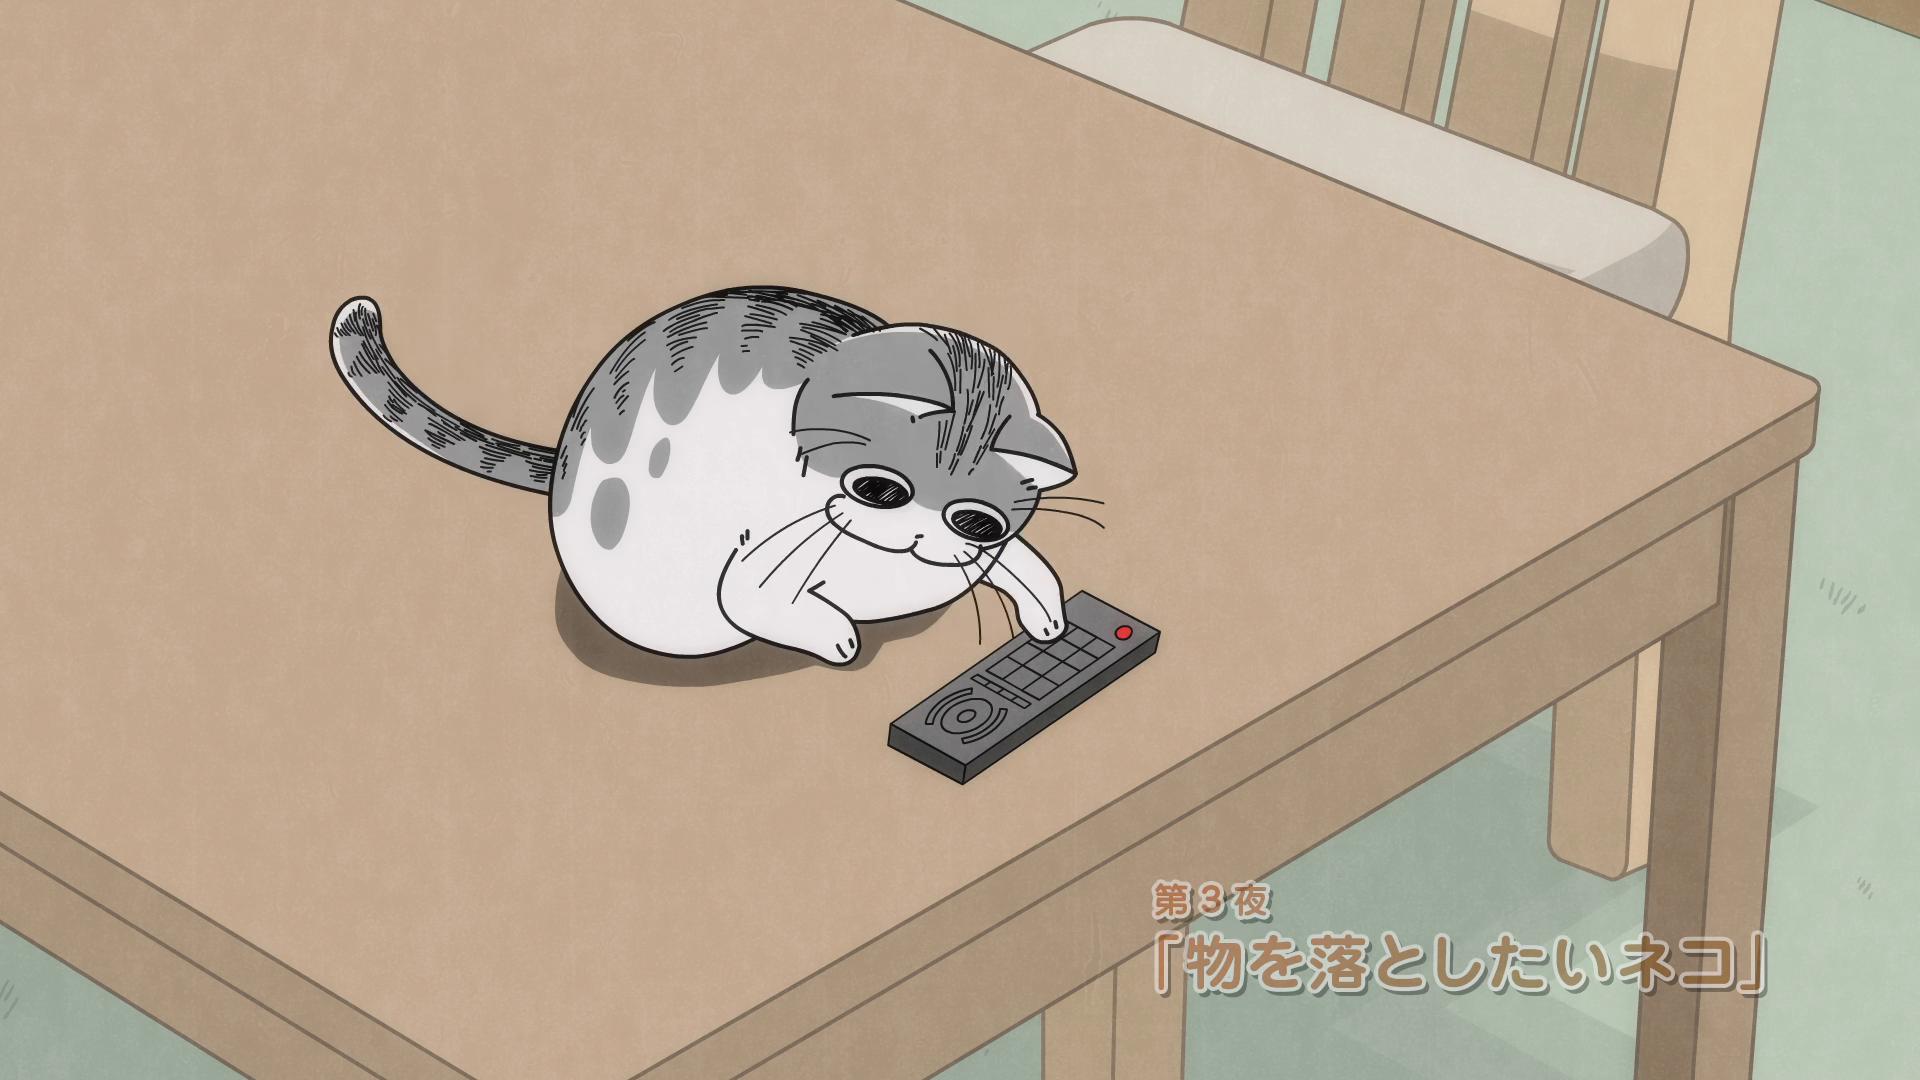 TV ratings for Nights With A Cat (夜は猫といっしょ) in South Korea. Tokyo MX TV series